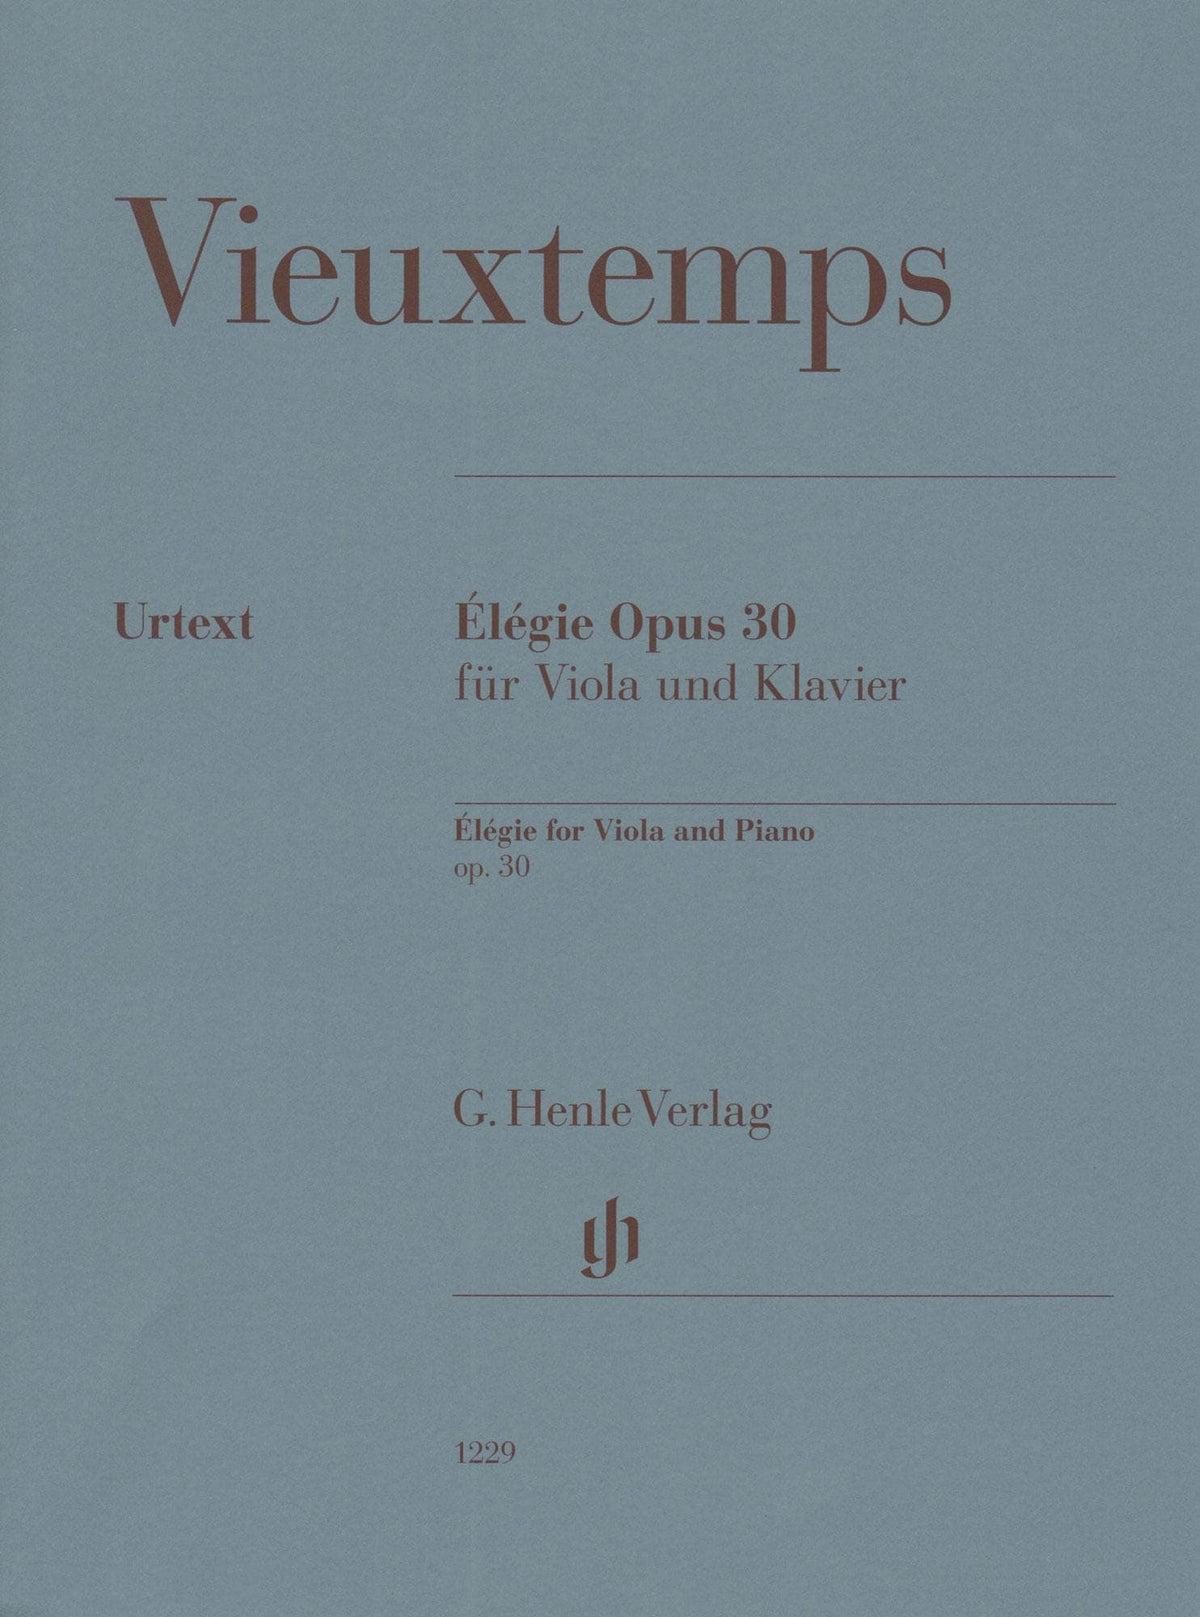 Vieuxtemps, Henri - Elegie, Opus 30 - for Viola and Piano - edited by Jost and Zimmermann - G Henle URTEXT